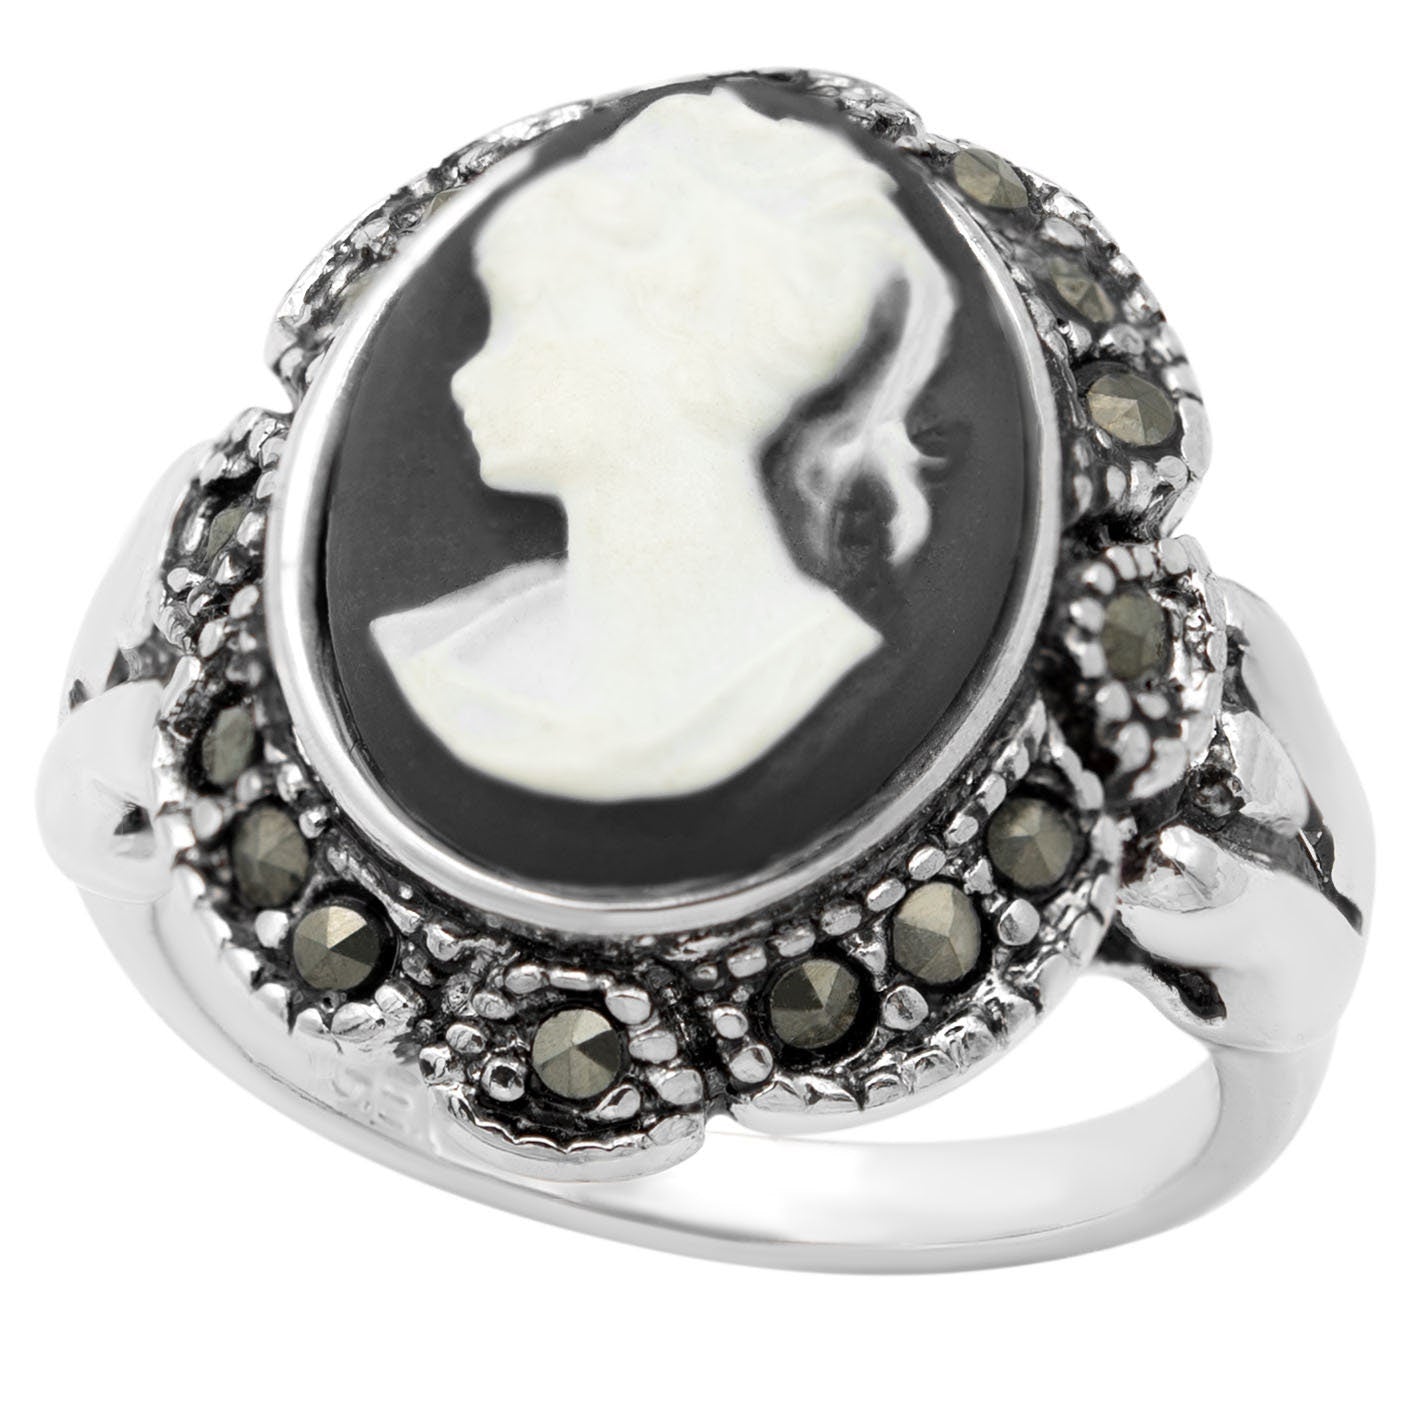 Vintage Ring 1970s 18k Antique White Gold Plated White on BLACK Cameo Ring Genuine Marcasite Womans Costume Handmade Jewelry #R1730